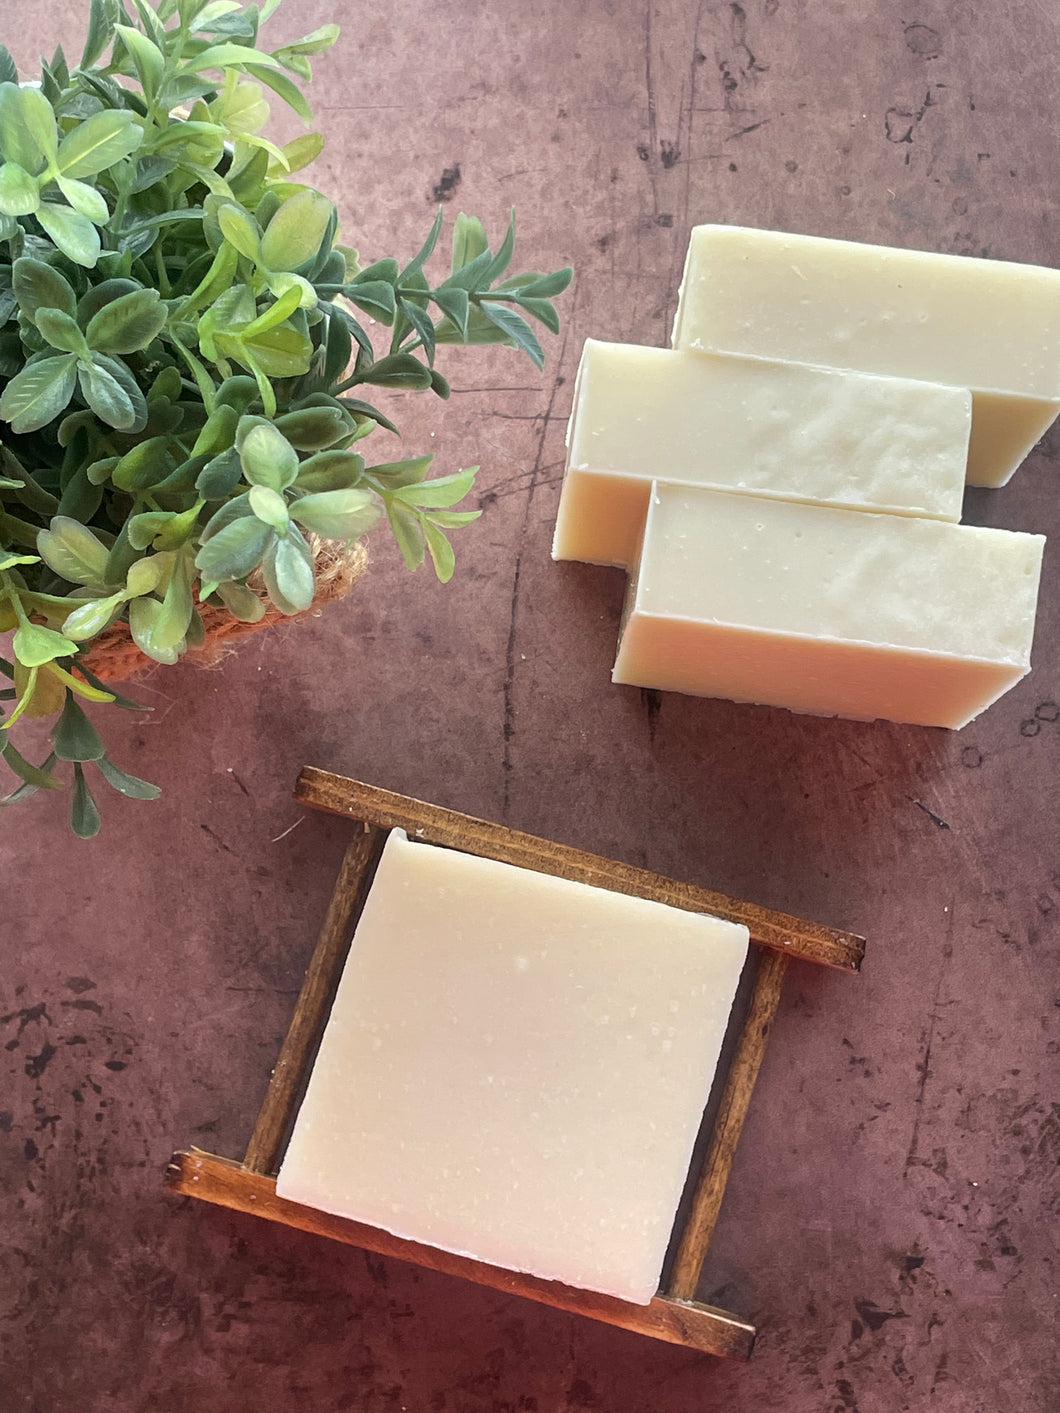 BASIC BETTY HANDCRAFTED SOAP